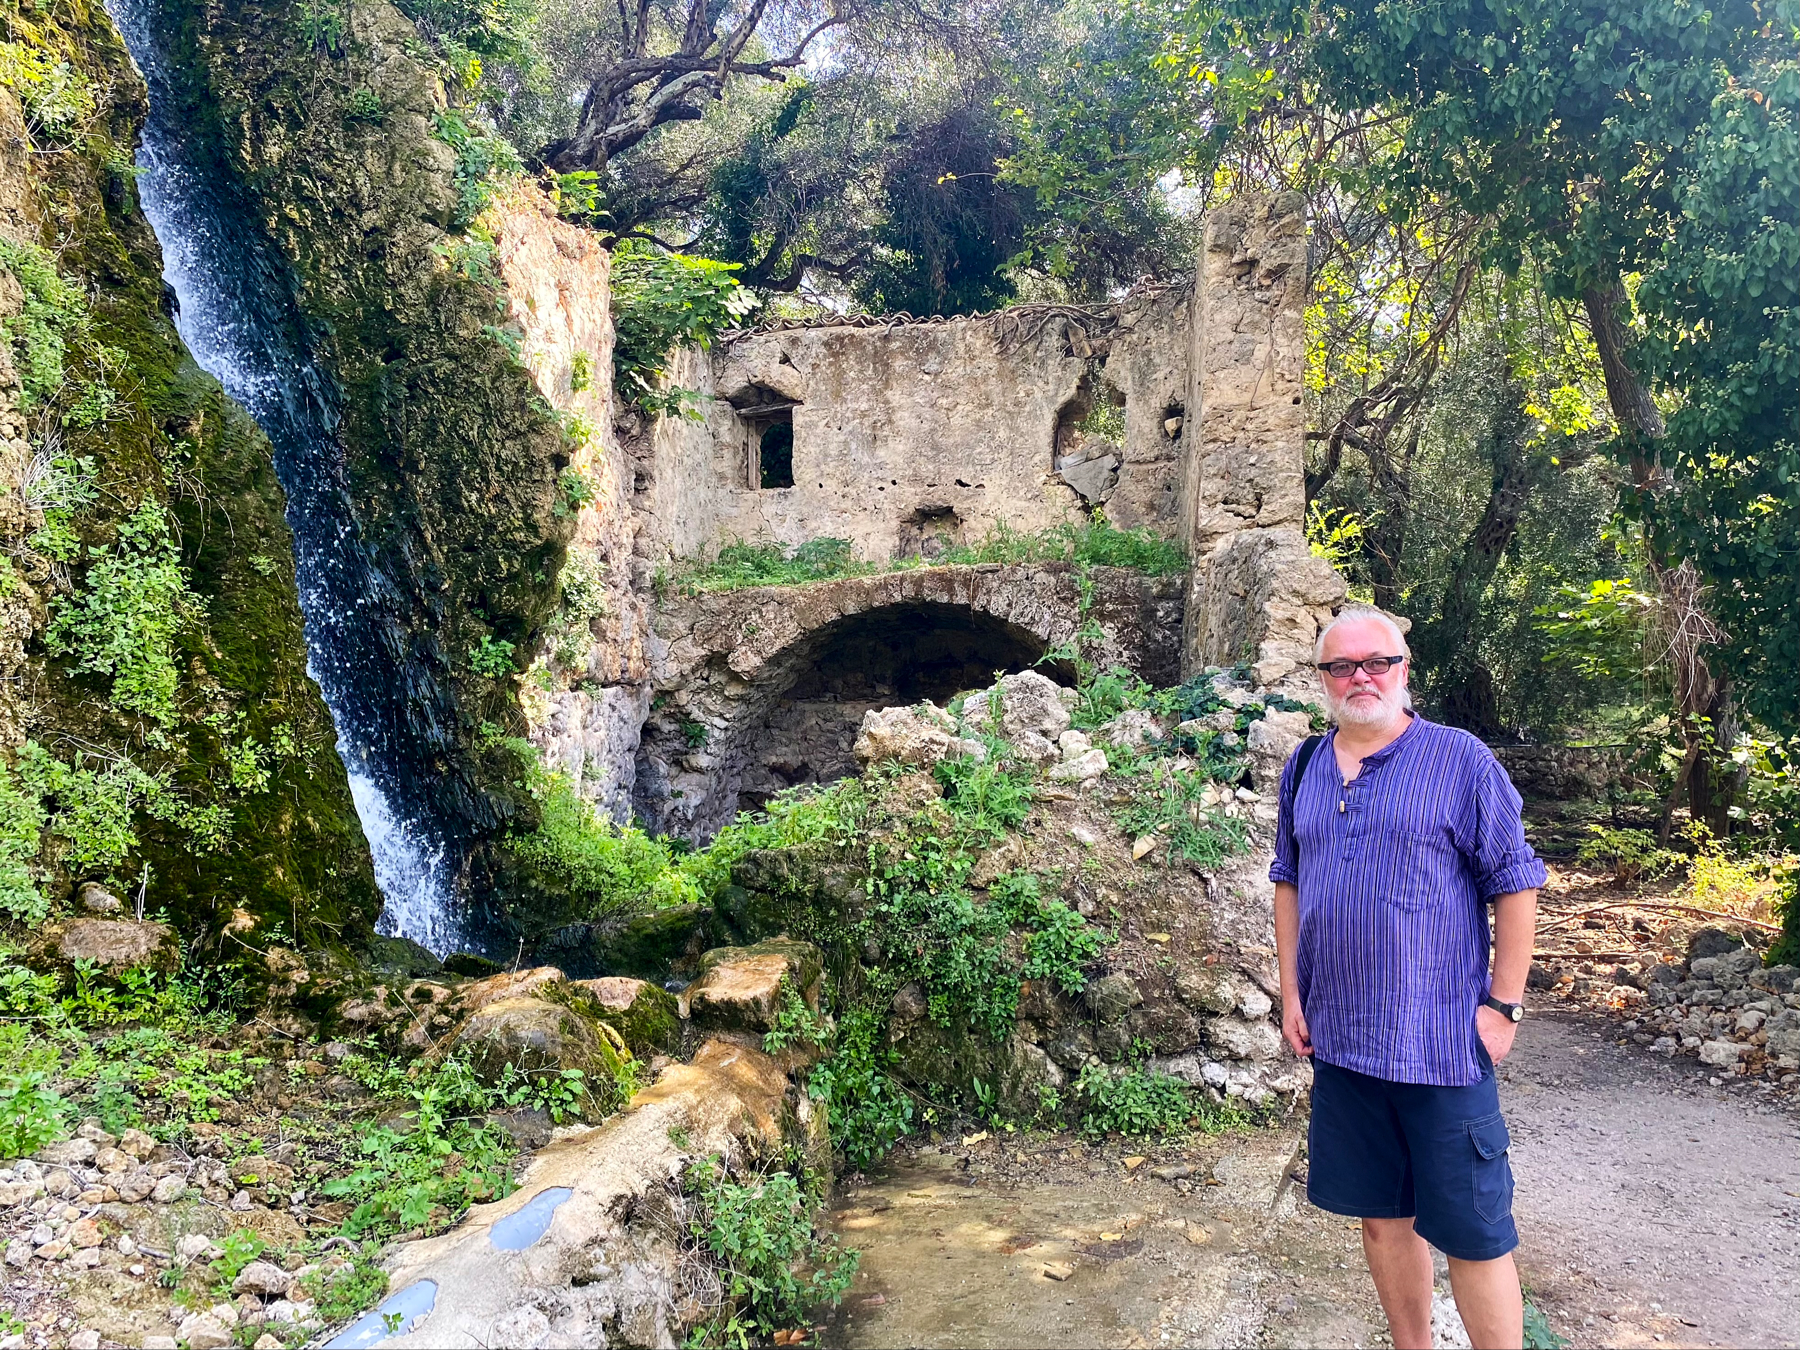 Man standing next to foliage covered ruined building. Stone archway and vertical cascade of water visible 